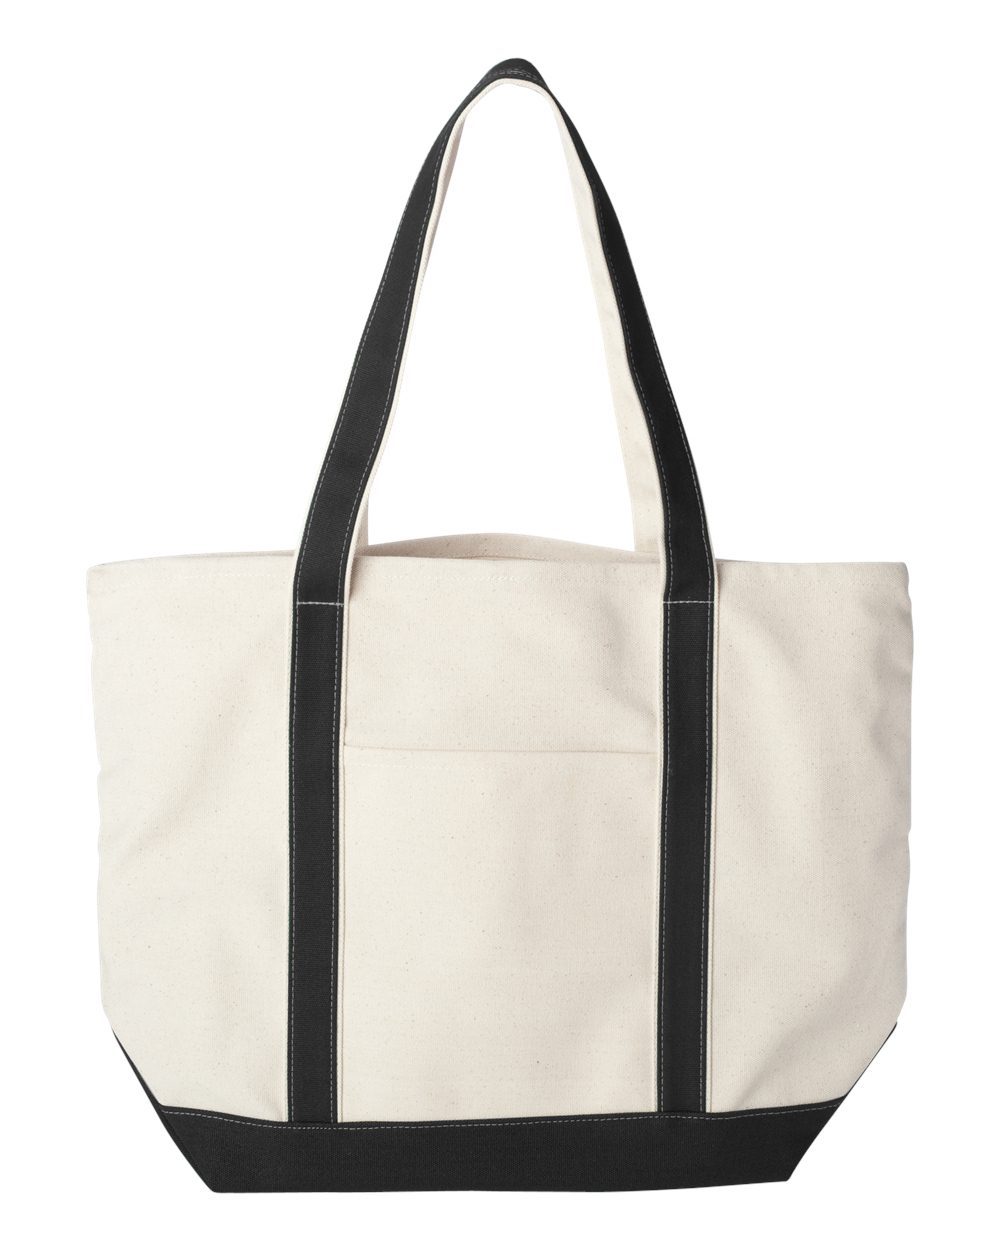 old skool working class original Tote Shopping & Gym & Beach Bag 42cm X 38cm with Handles By Valentine Herty